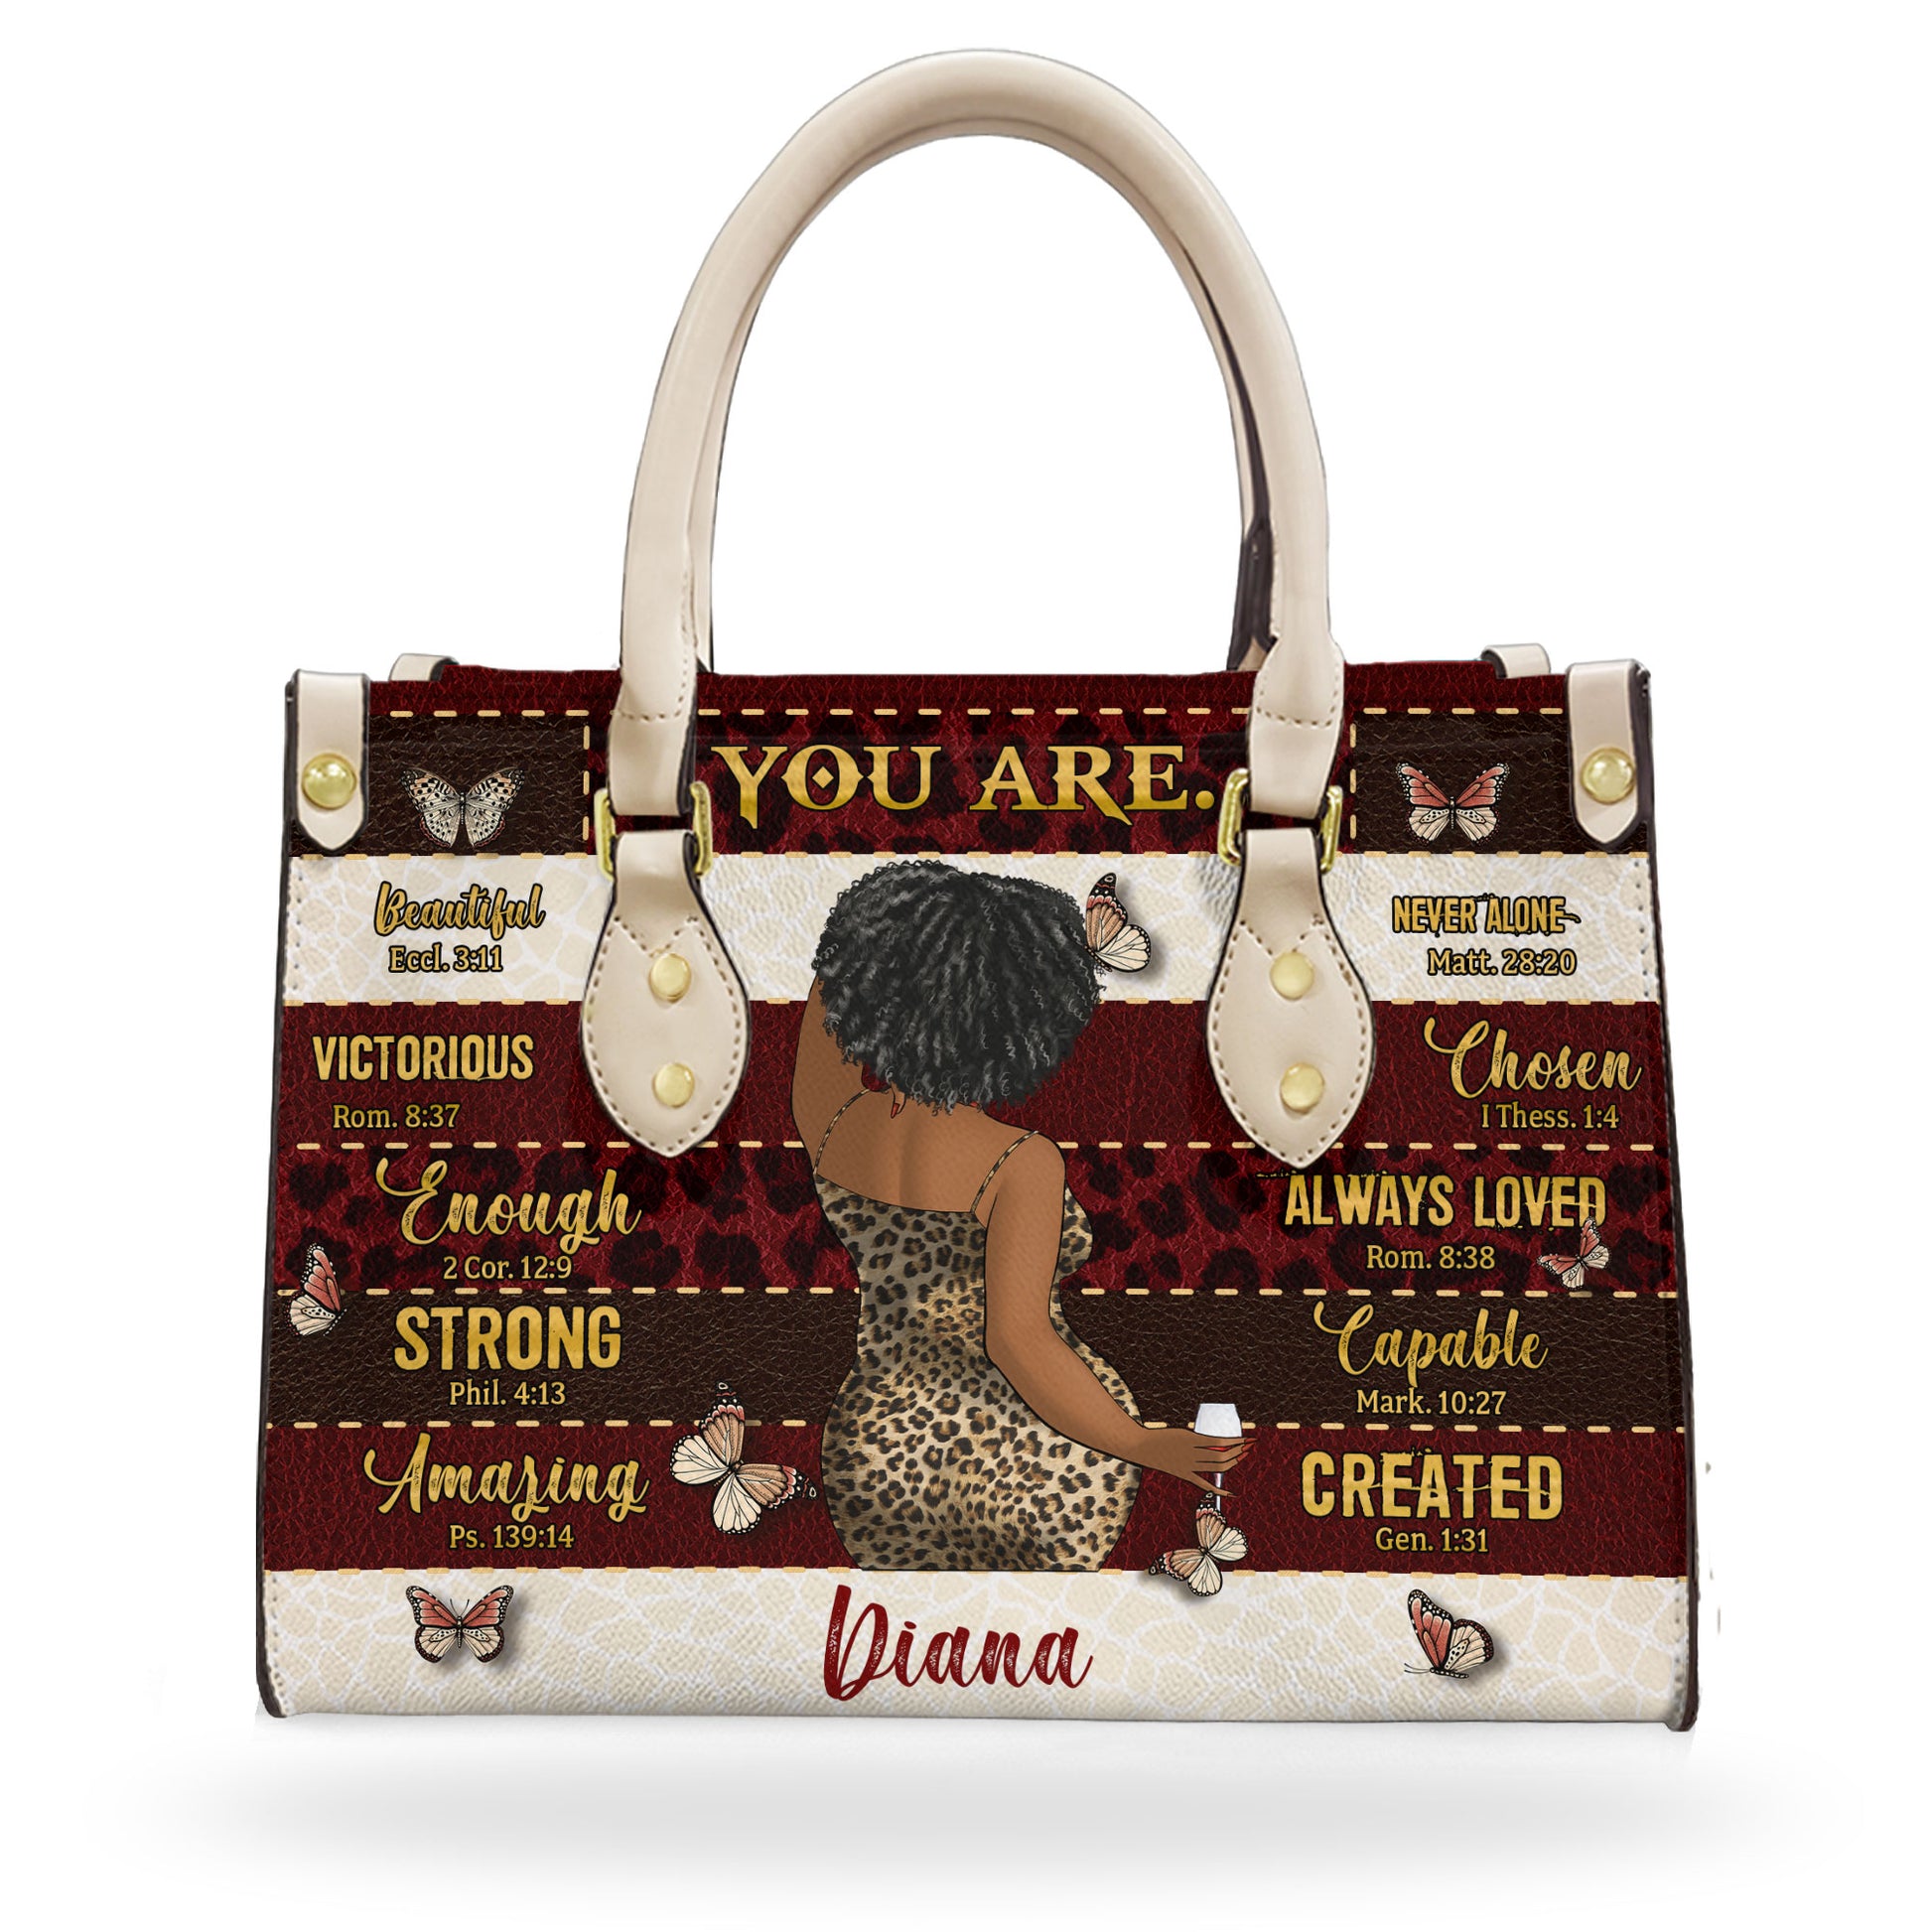 You Are Beautiful Enough Victorious - Personalized Leather Bag - Birthday, Black Month History Gift For Black Woman